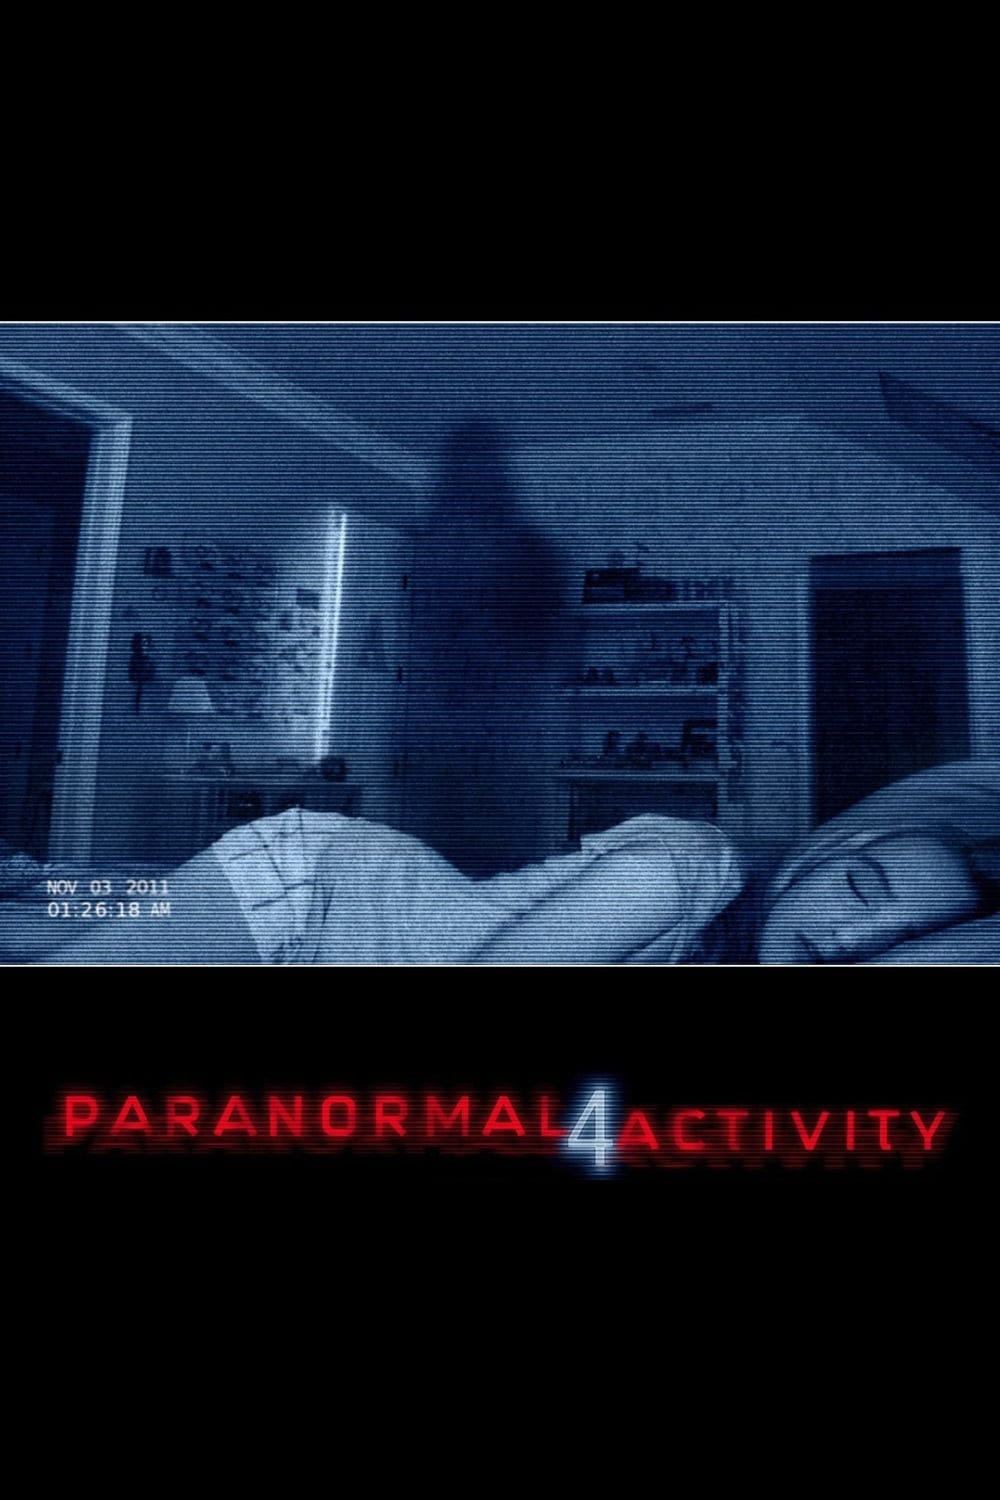 Paranormal Activity 4 movie poster